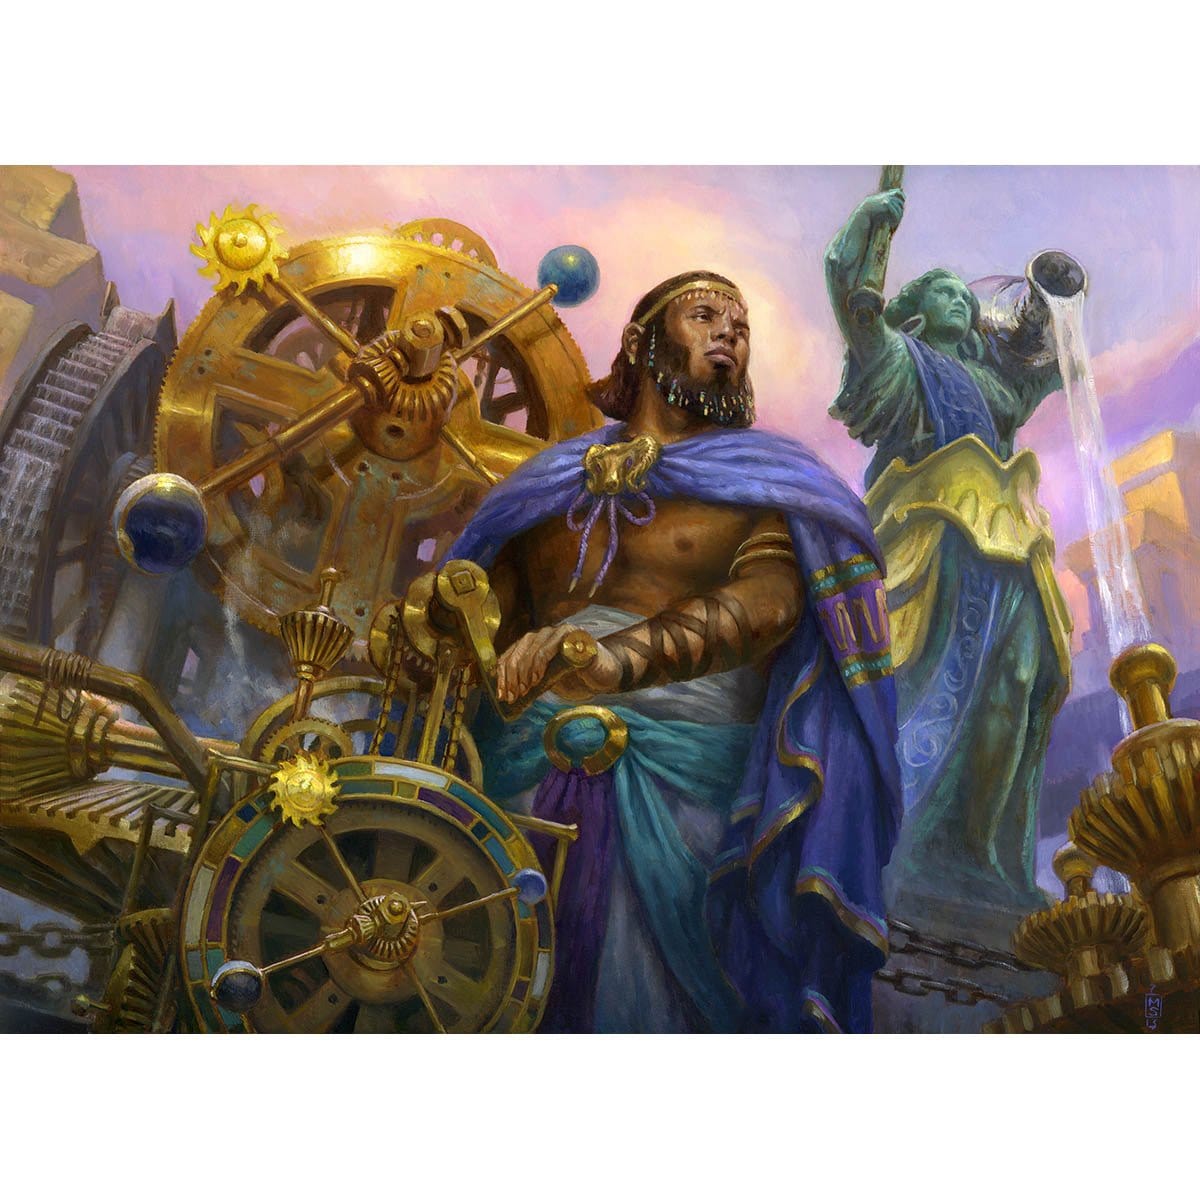 Sage of Hours Print - Print - Original Magic Art - Accessories for Magic the Gathering and other card games